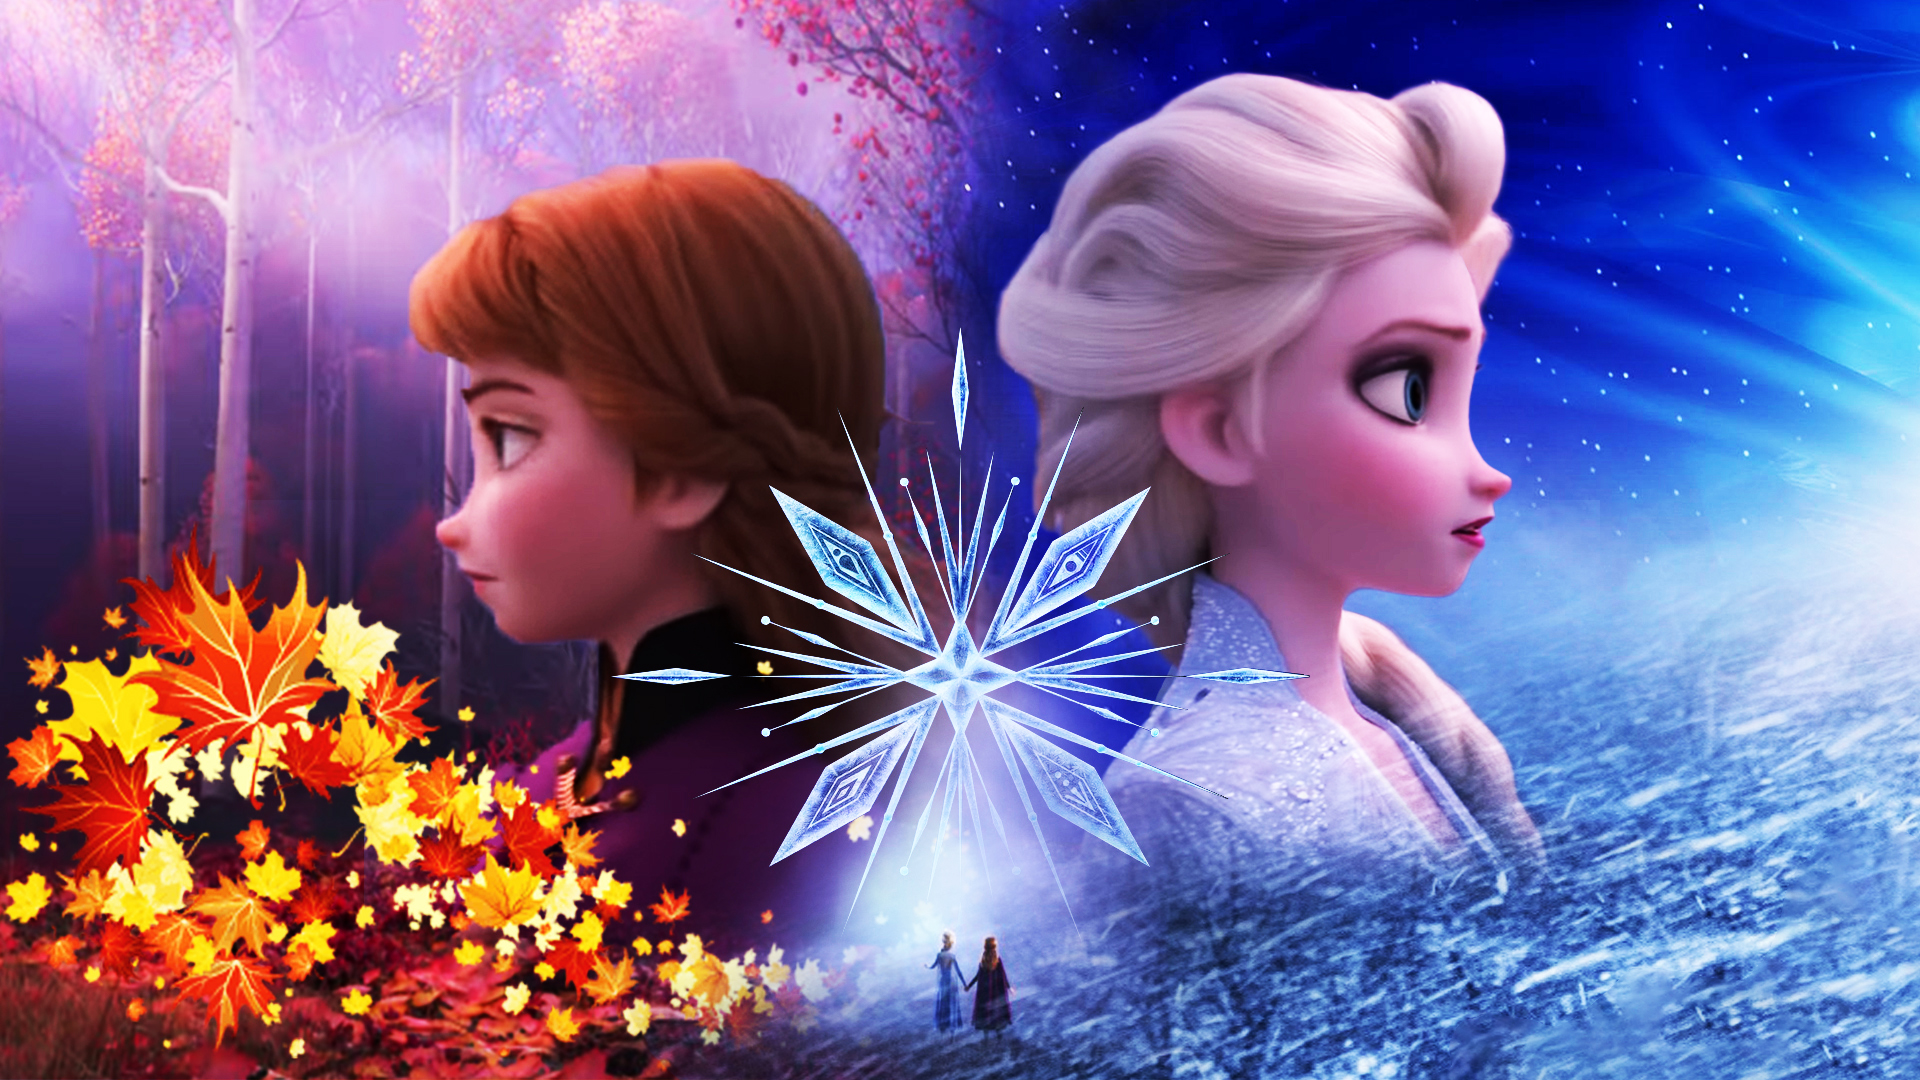 Frozen 3 Release Date, Trailer, Story Details and Rumors on the Disney